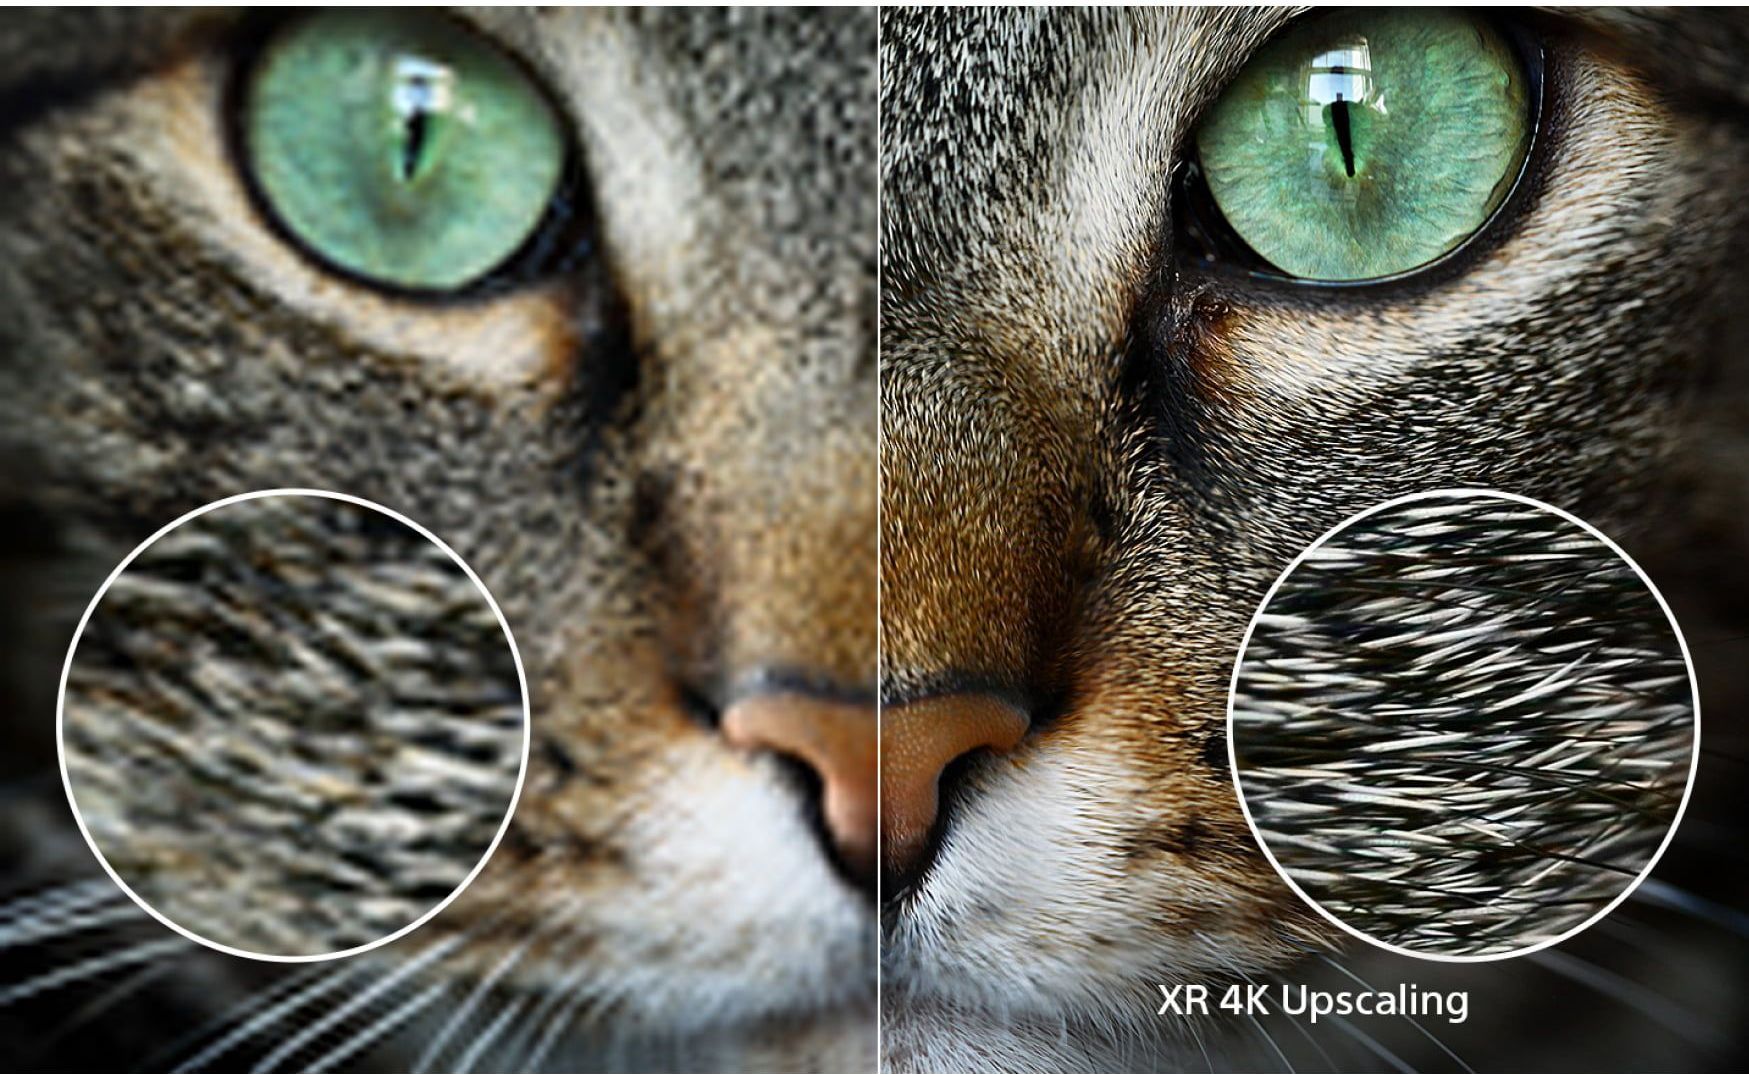 a close up of a cat 's face with xr 4k upscaling on a sony mini led tv